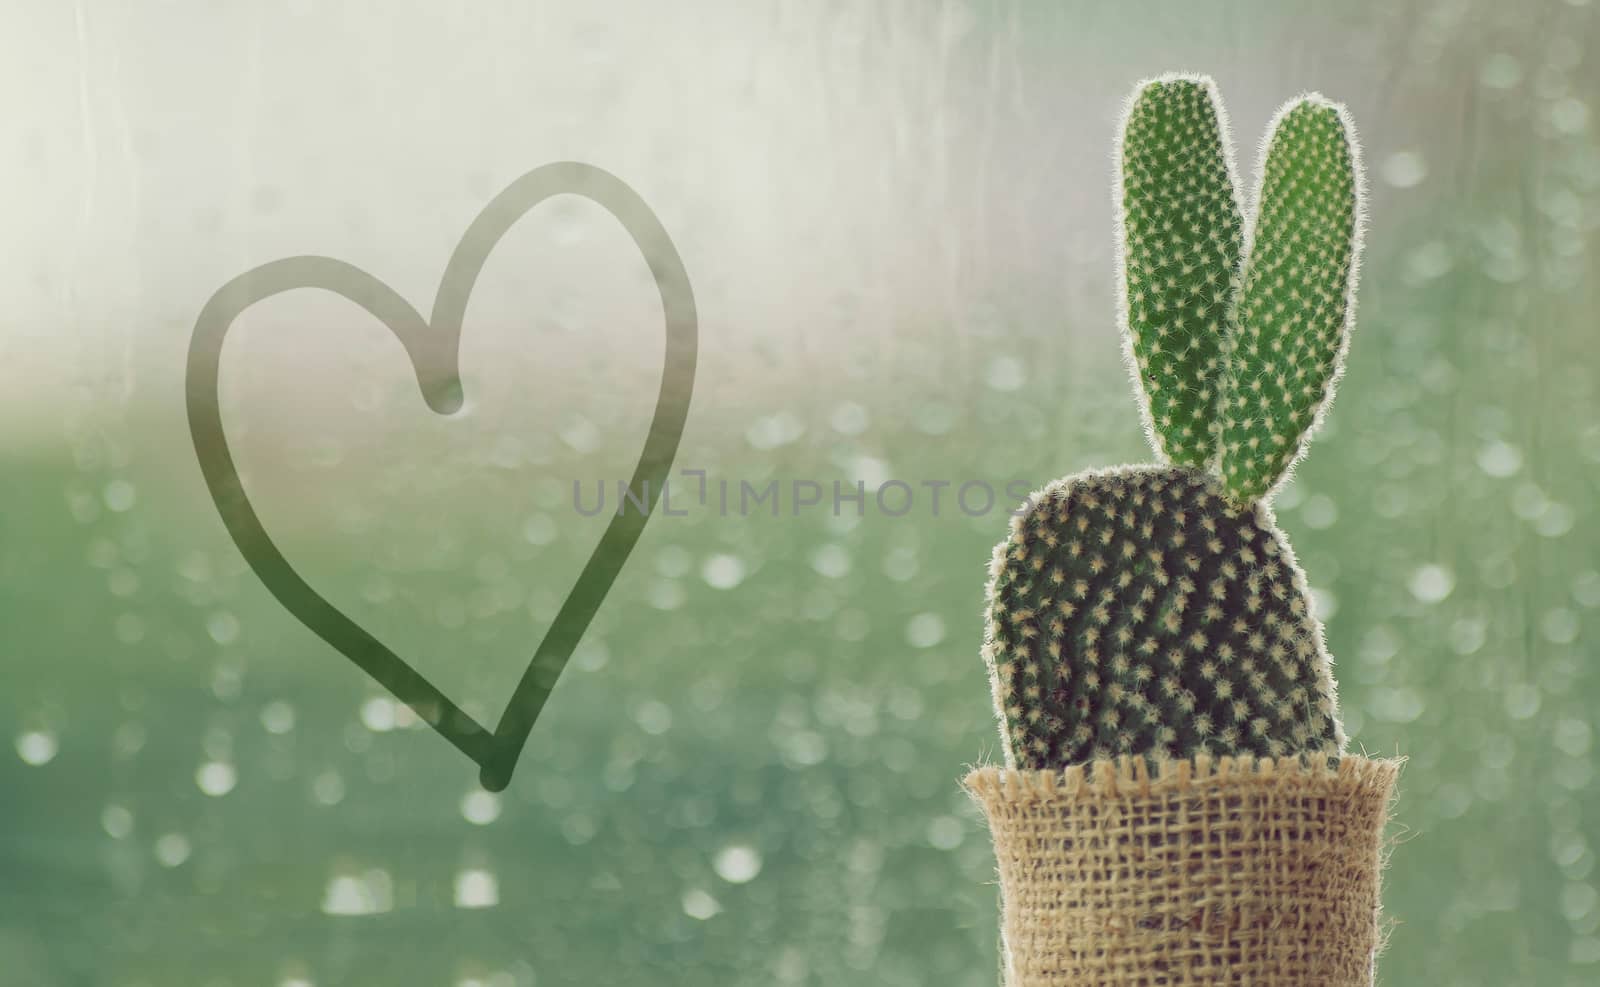 cactus on a rainy day with handwriting heart shape on water drop at window background. drops of rain on window glass background. by asiandelight